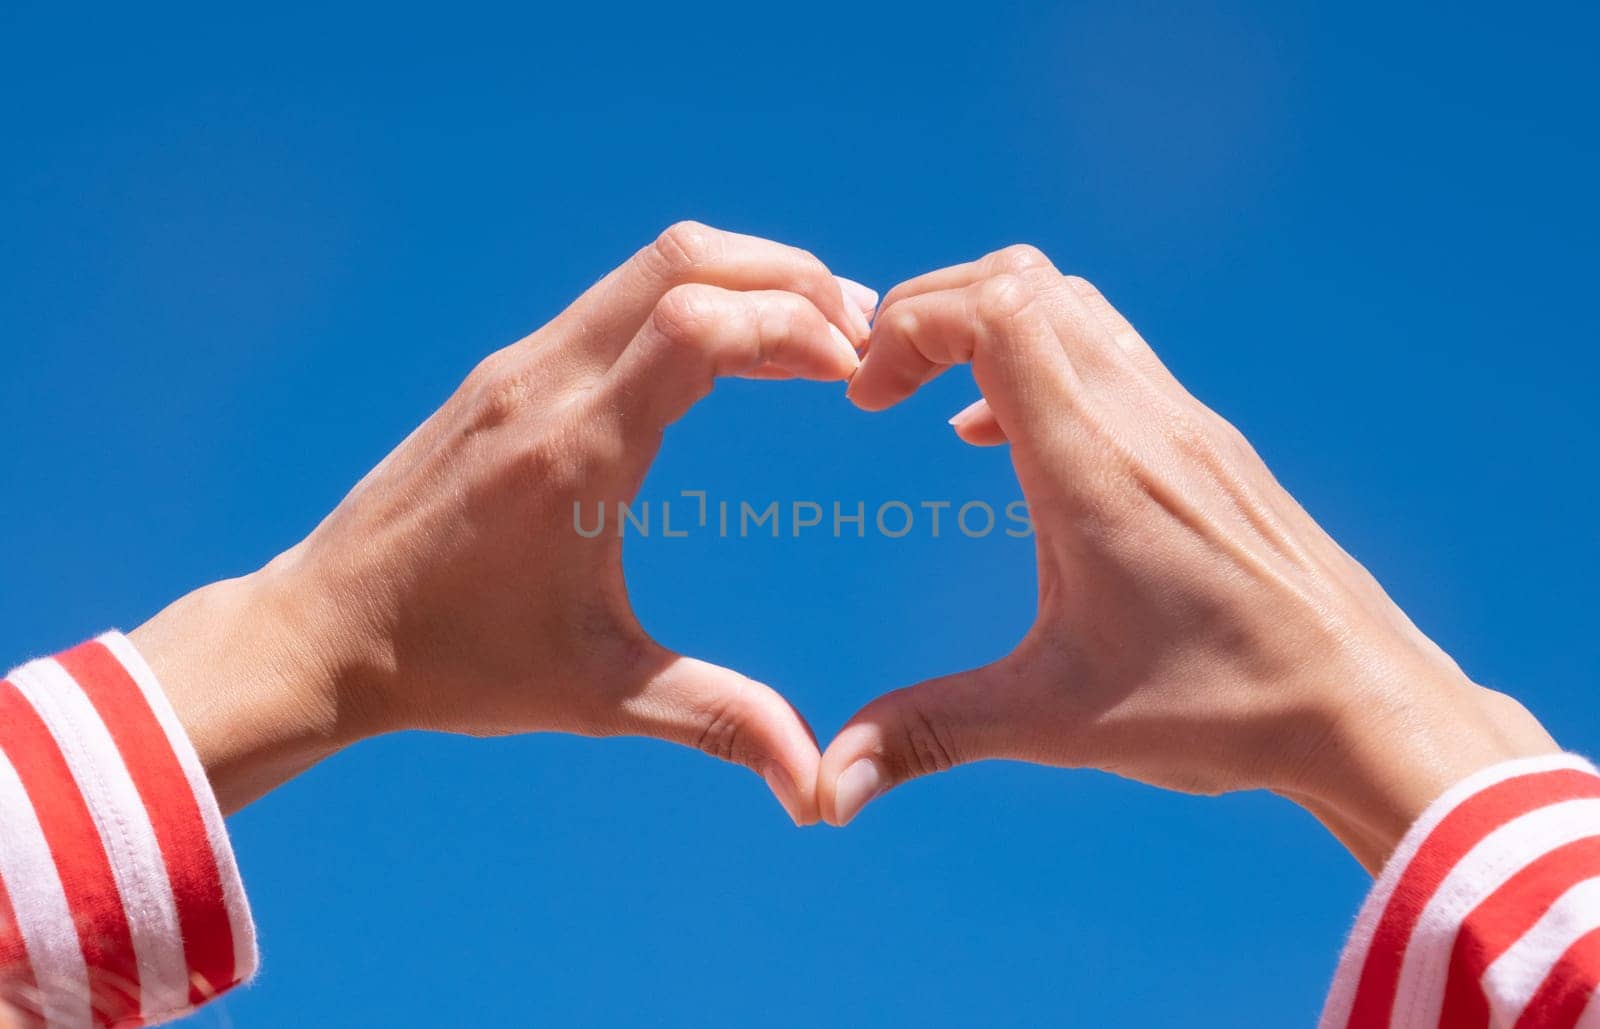 Female hands making sign Heart by fingers on sky background by Desperada